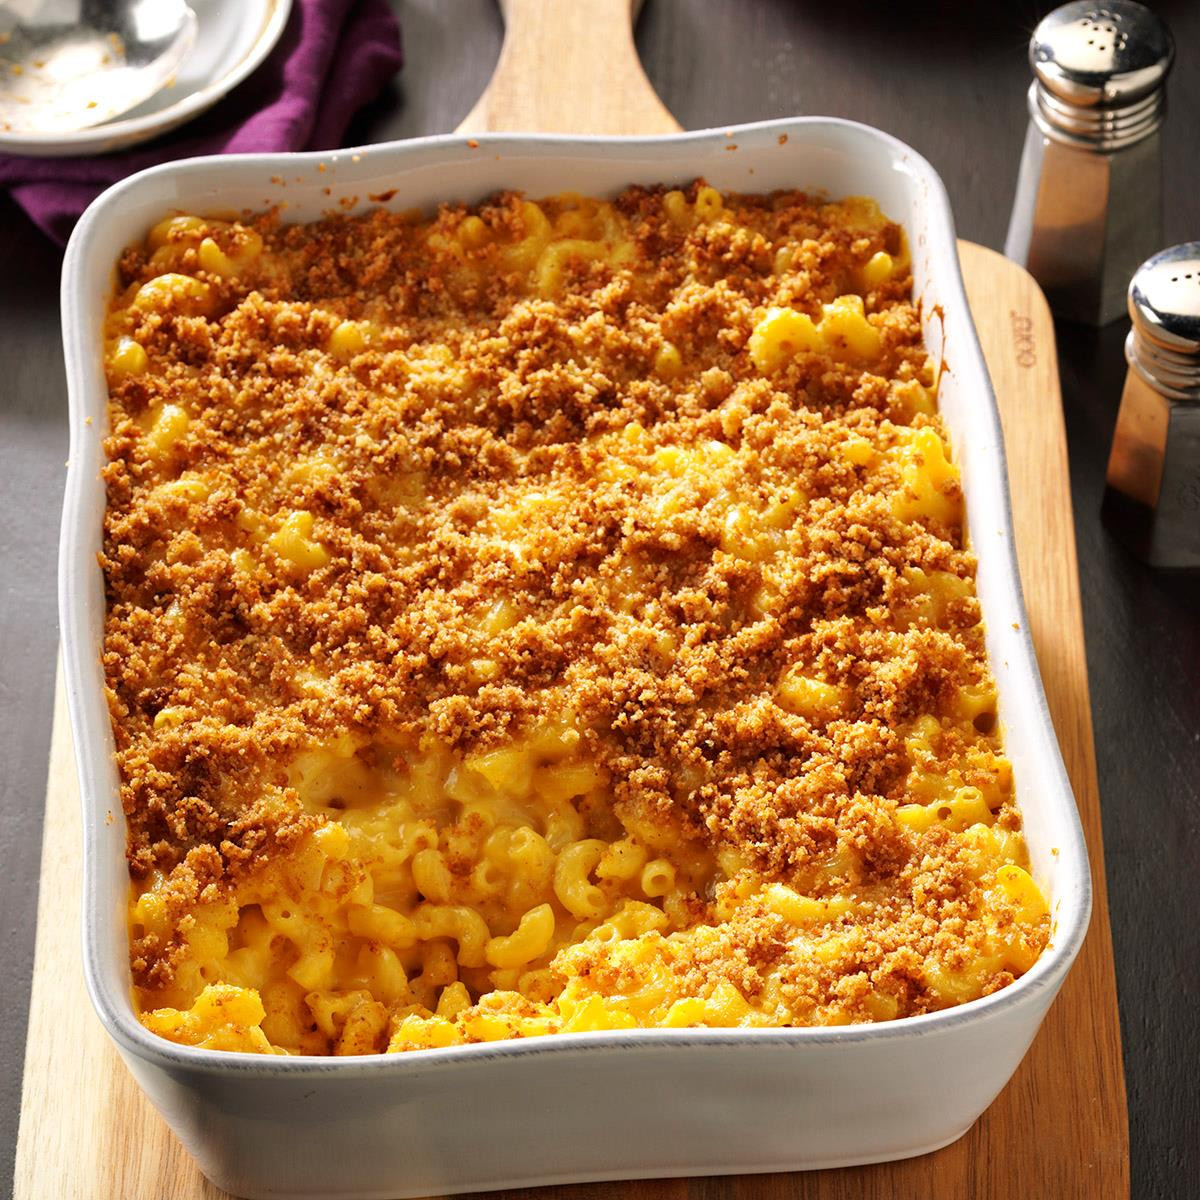 Baked Cheesy Macaroni And Cheese Recipe
 Baked Mac and Cheese Recipe